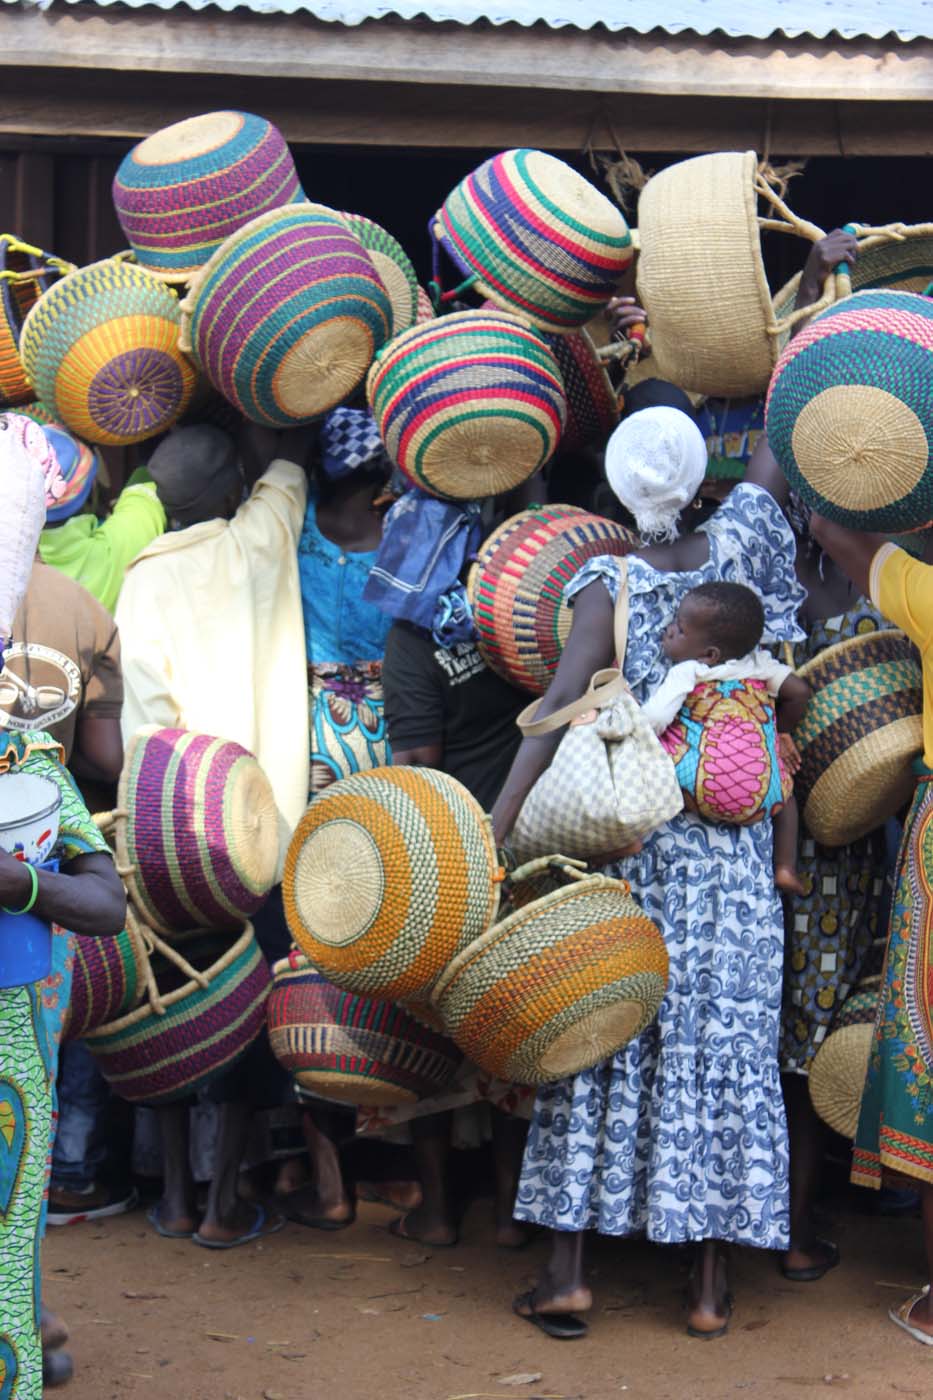 A throng of weavers and villagers offer up their baskets to sell